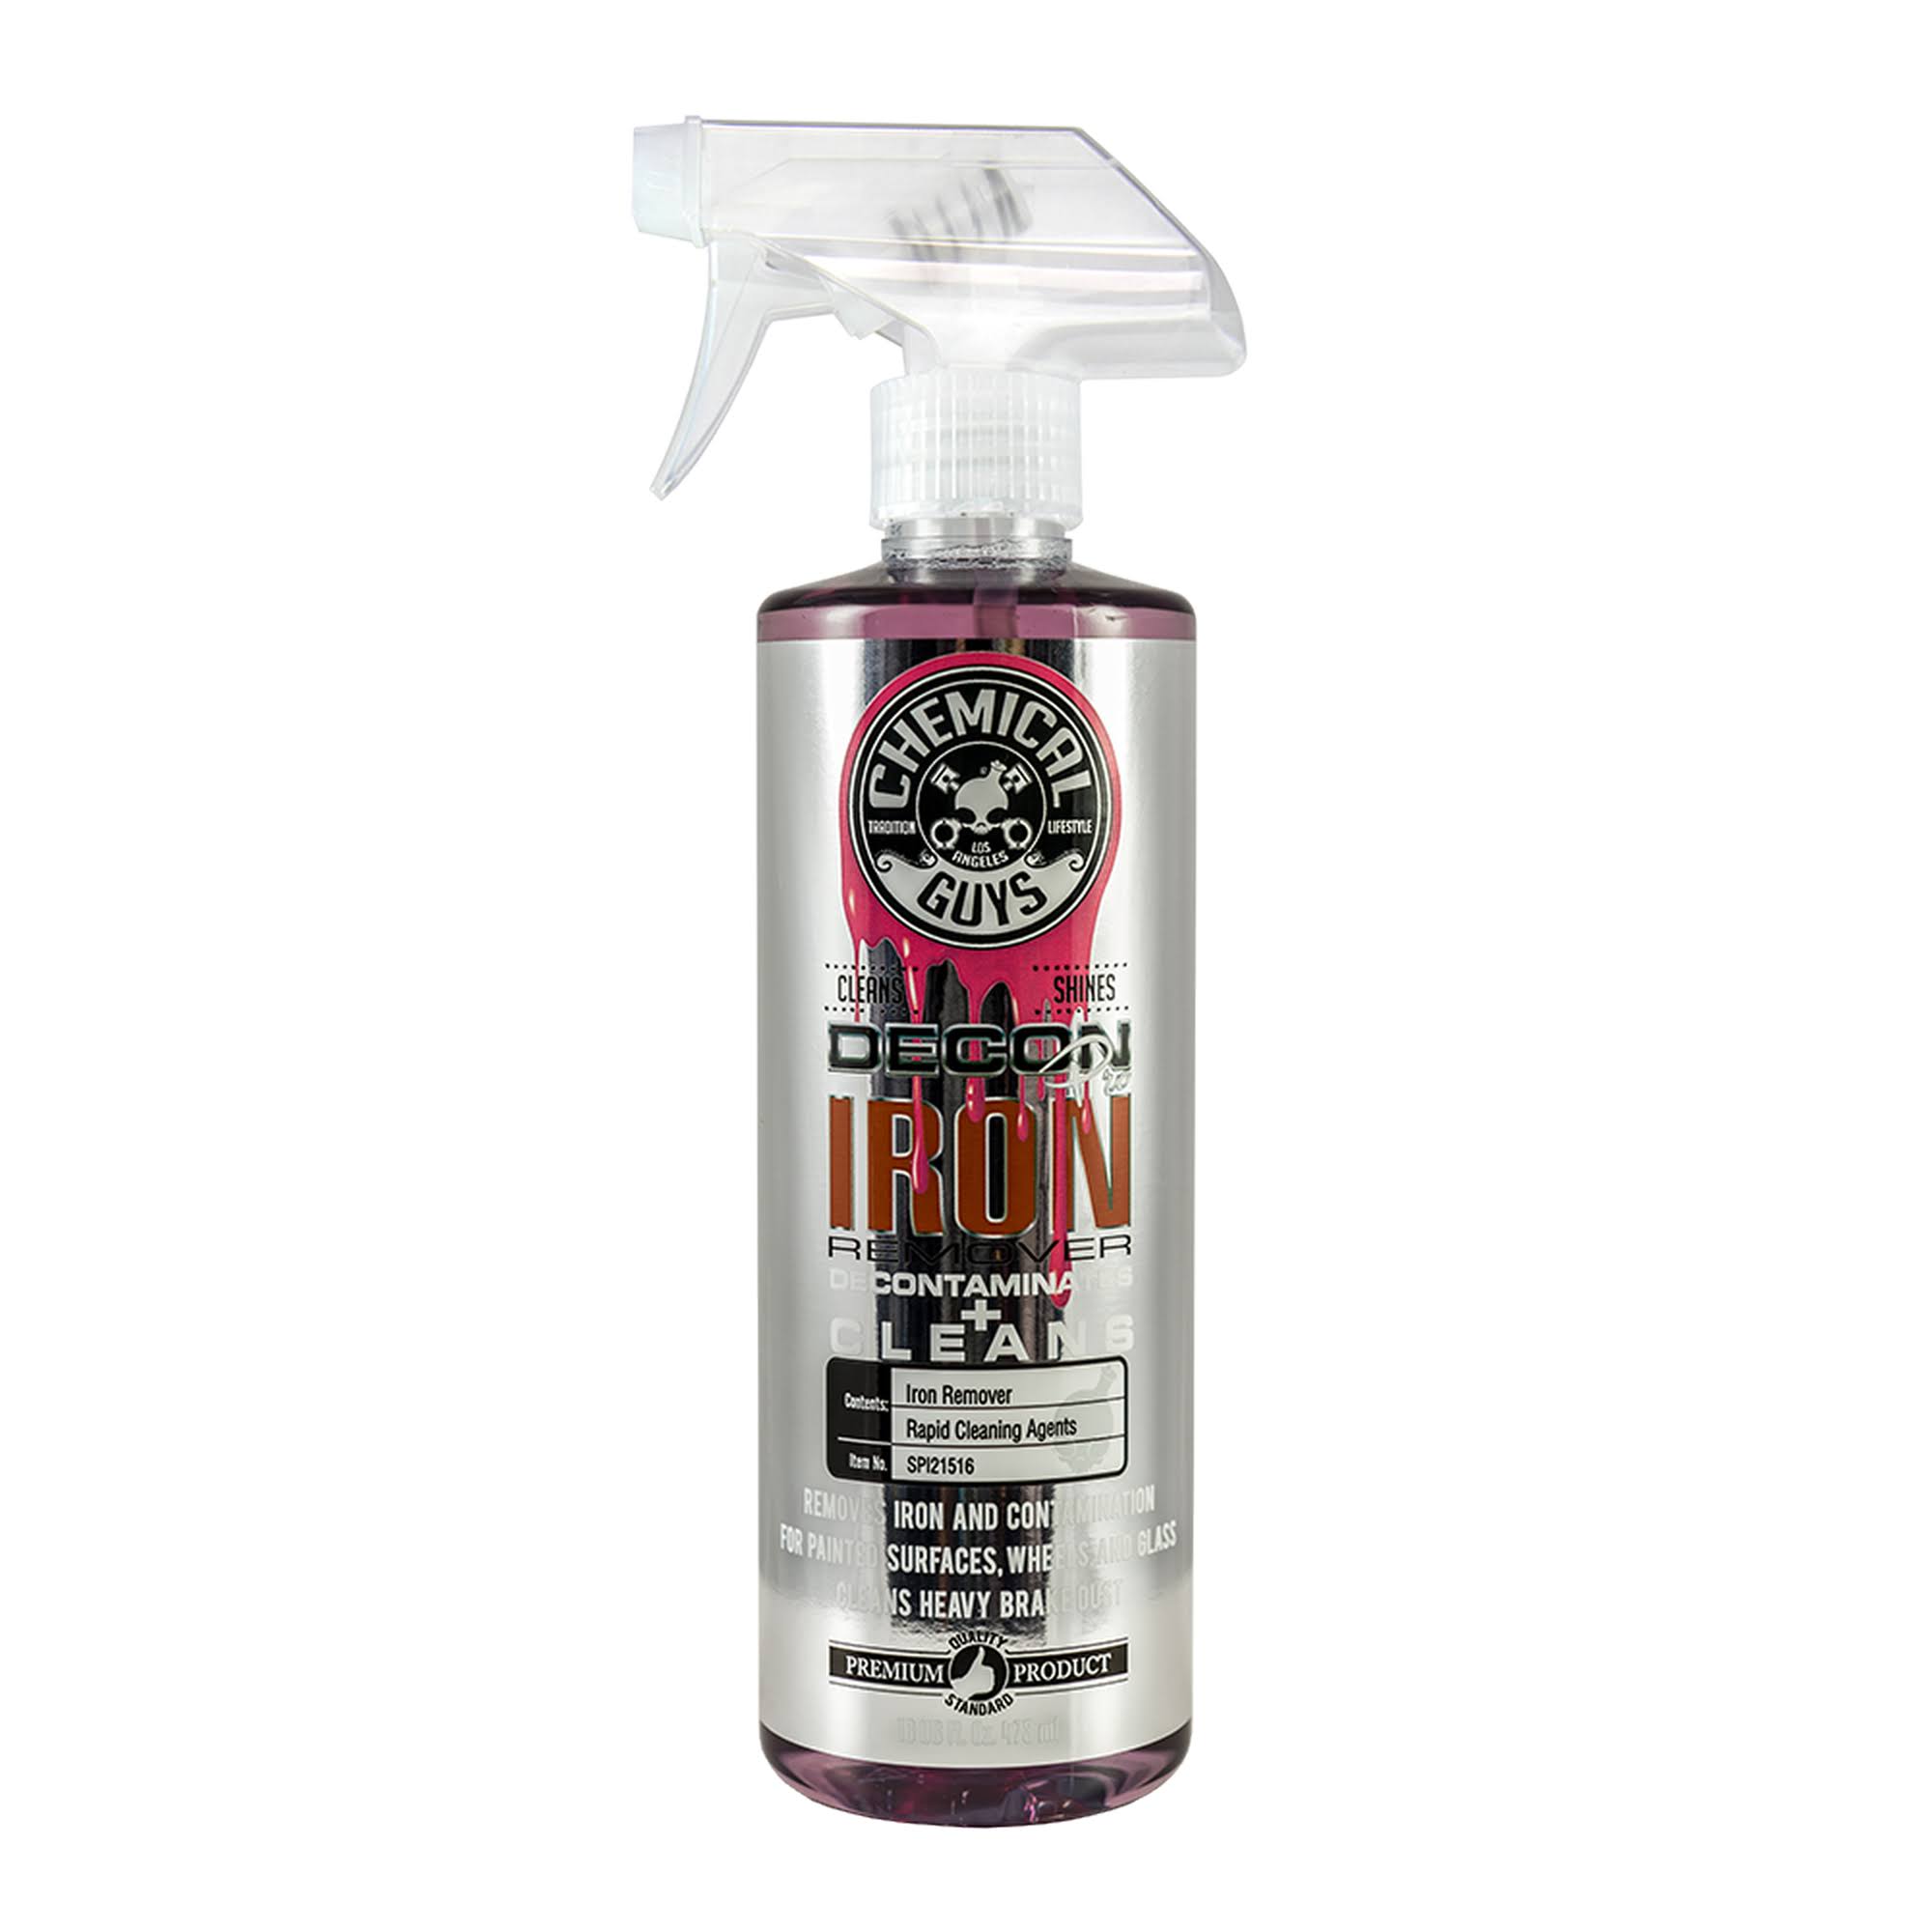  Chemical Guys SPI23416 Total Interior Cleaner and